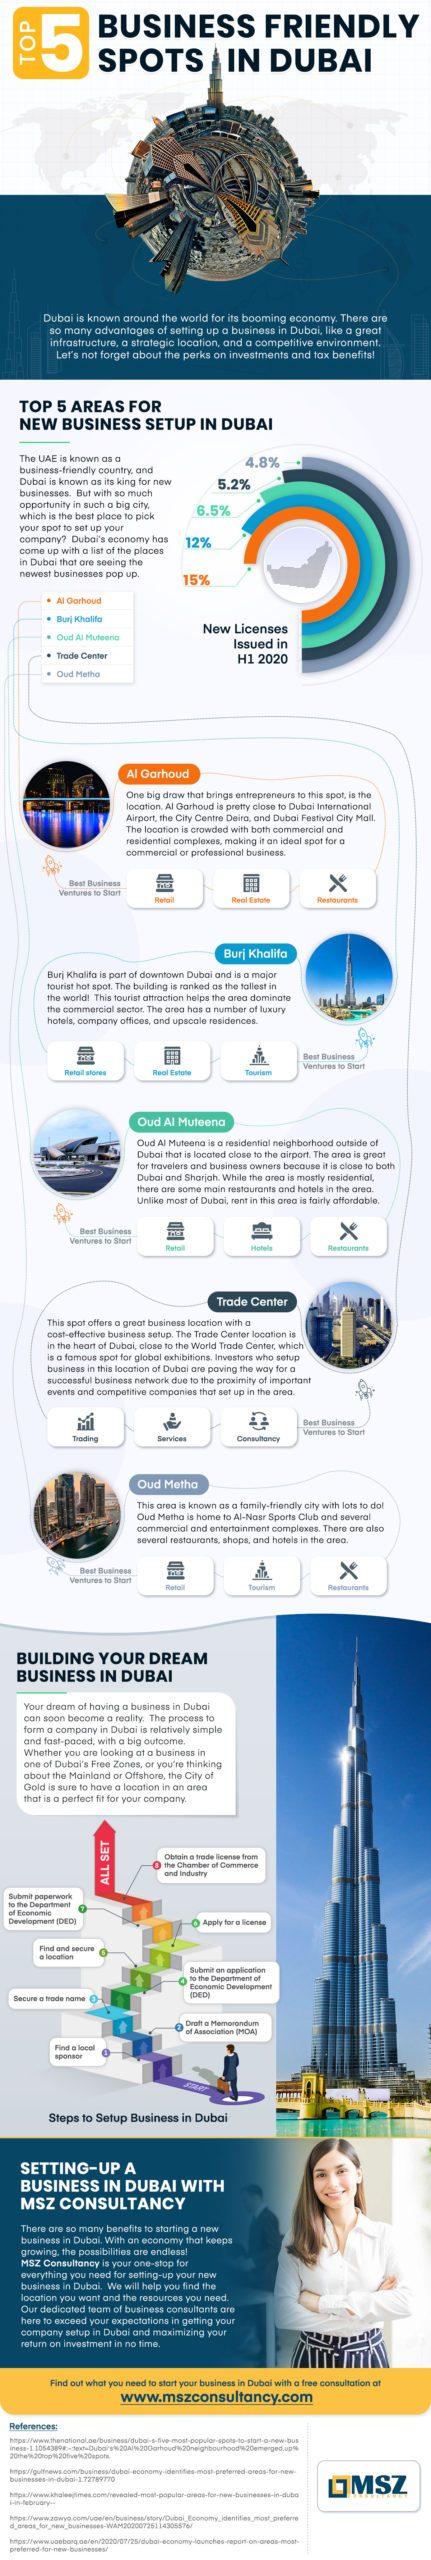 Top 5 Business-Friendly Spots in Dubai [InfoGraphic]